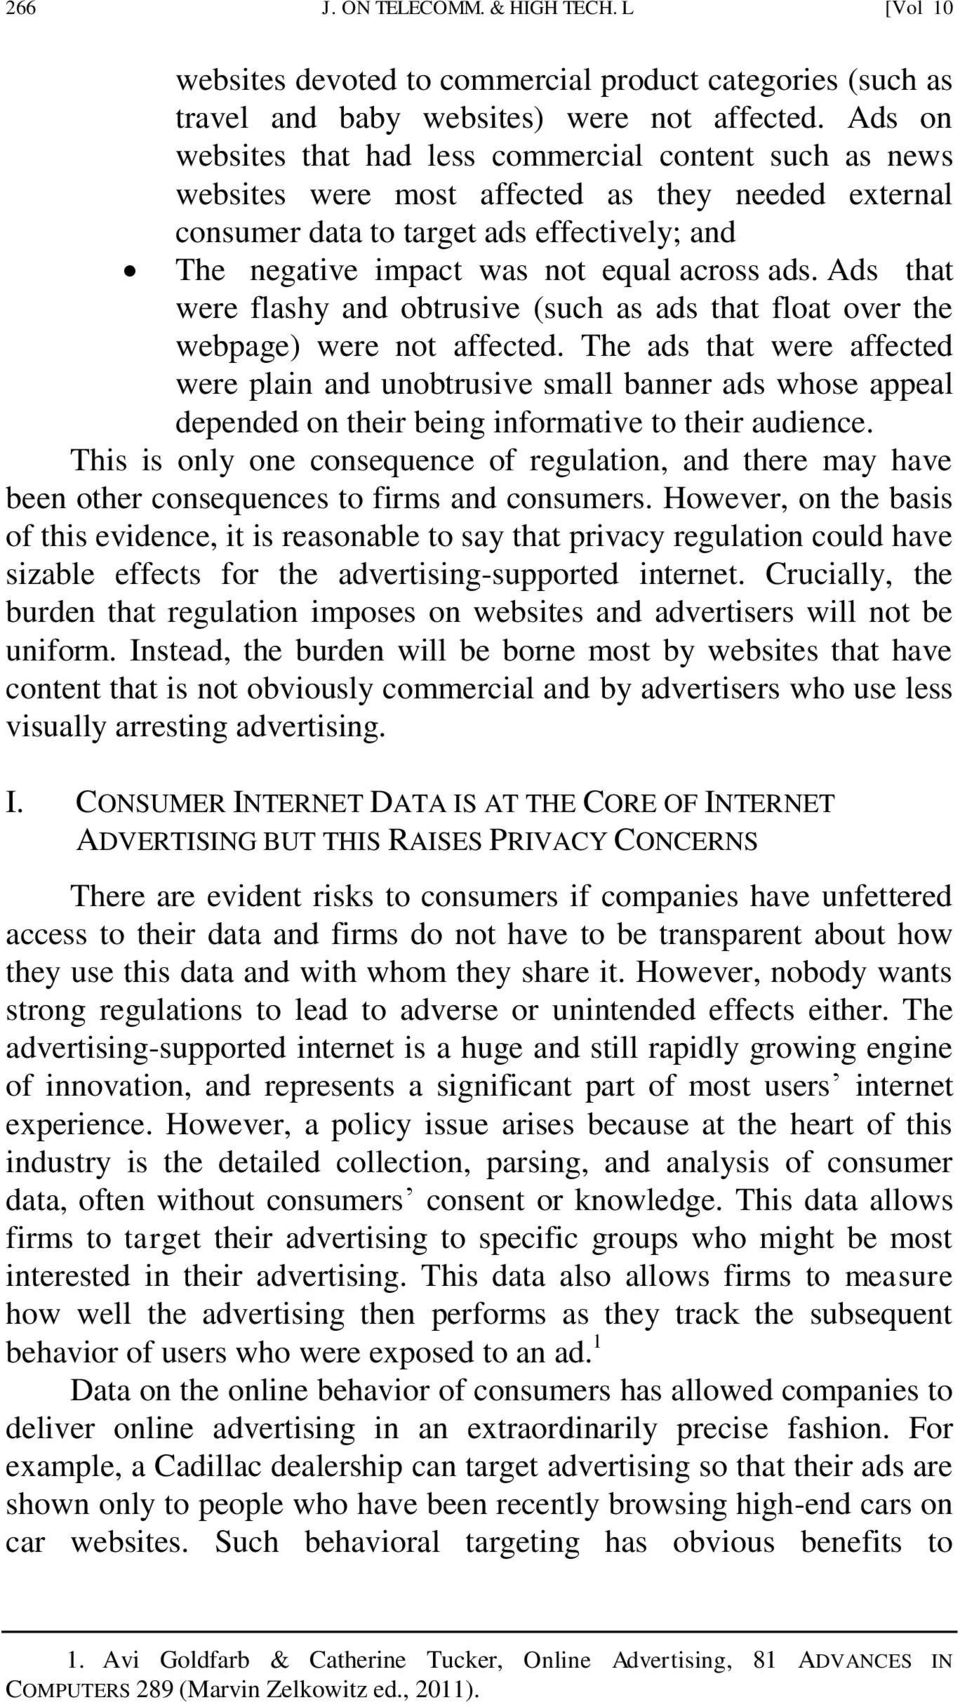 ads. Ads that were flashy and obtrusive (such as ads that float over the webpage) were not affected.